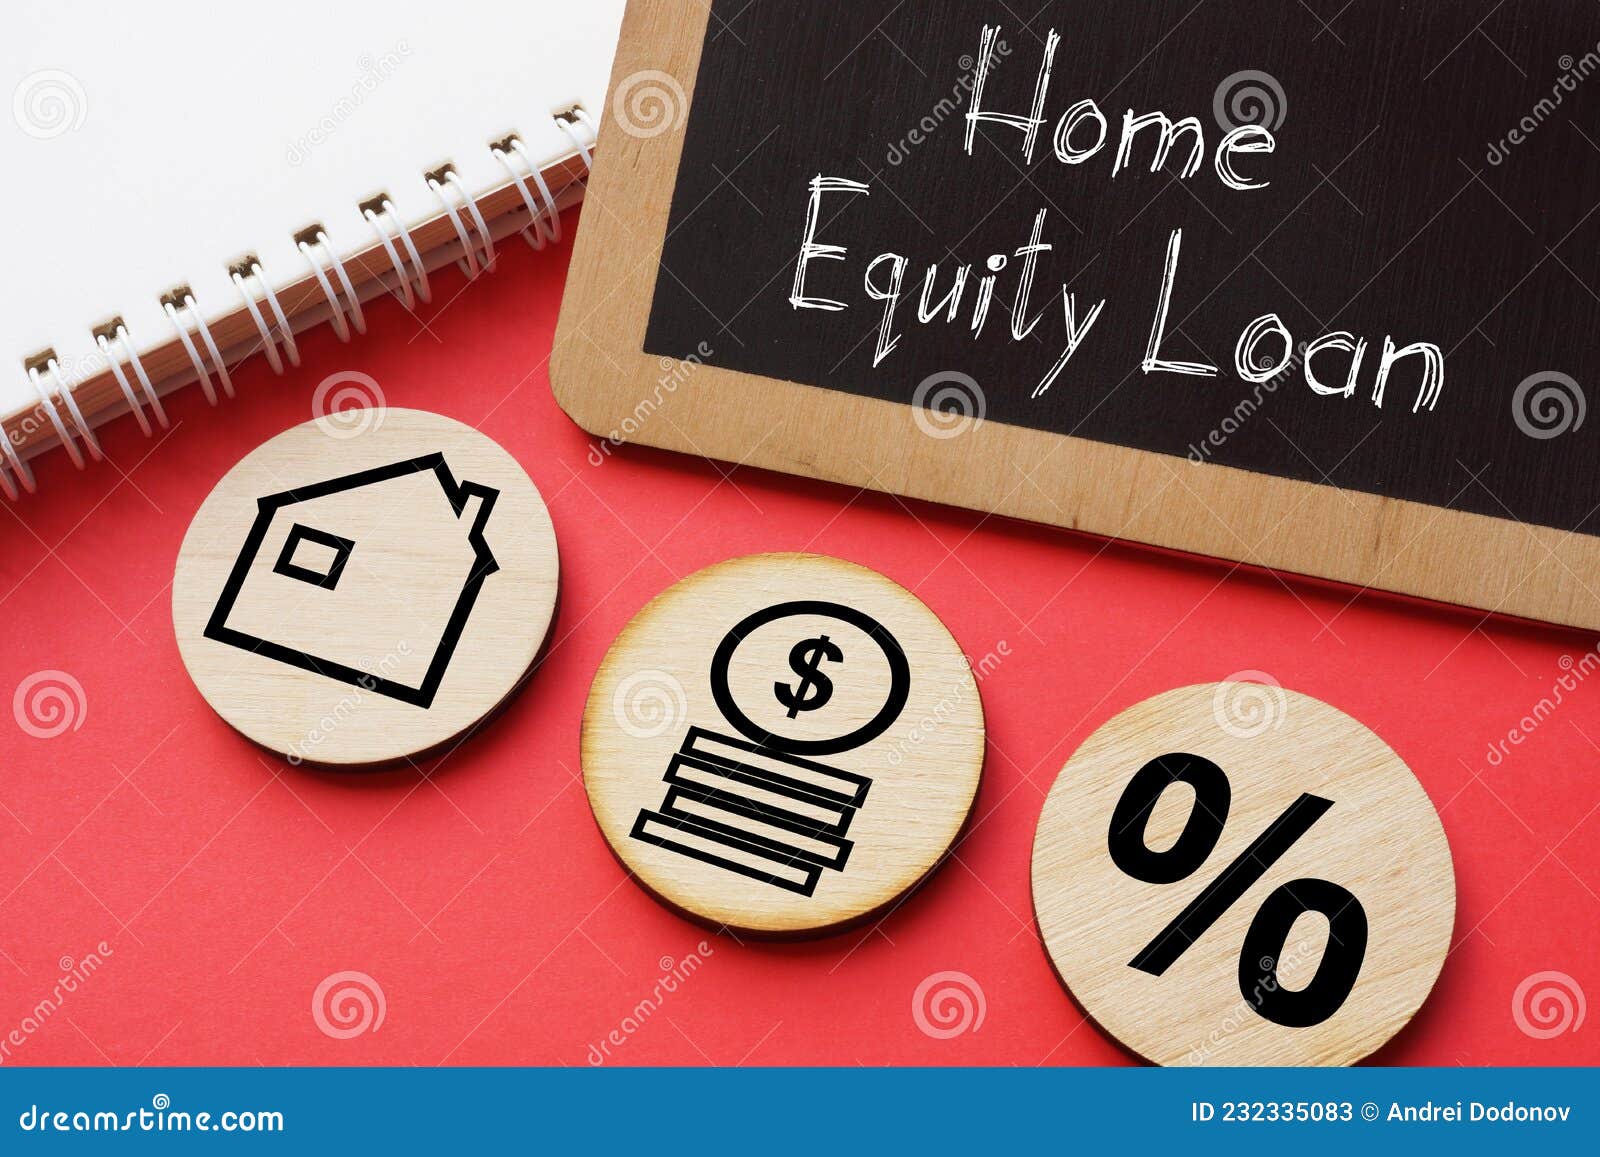 home-equity-loan-is-shown-on-the-photo-using-the-text-using-the-text